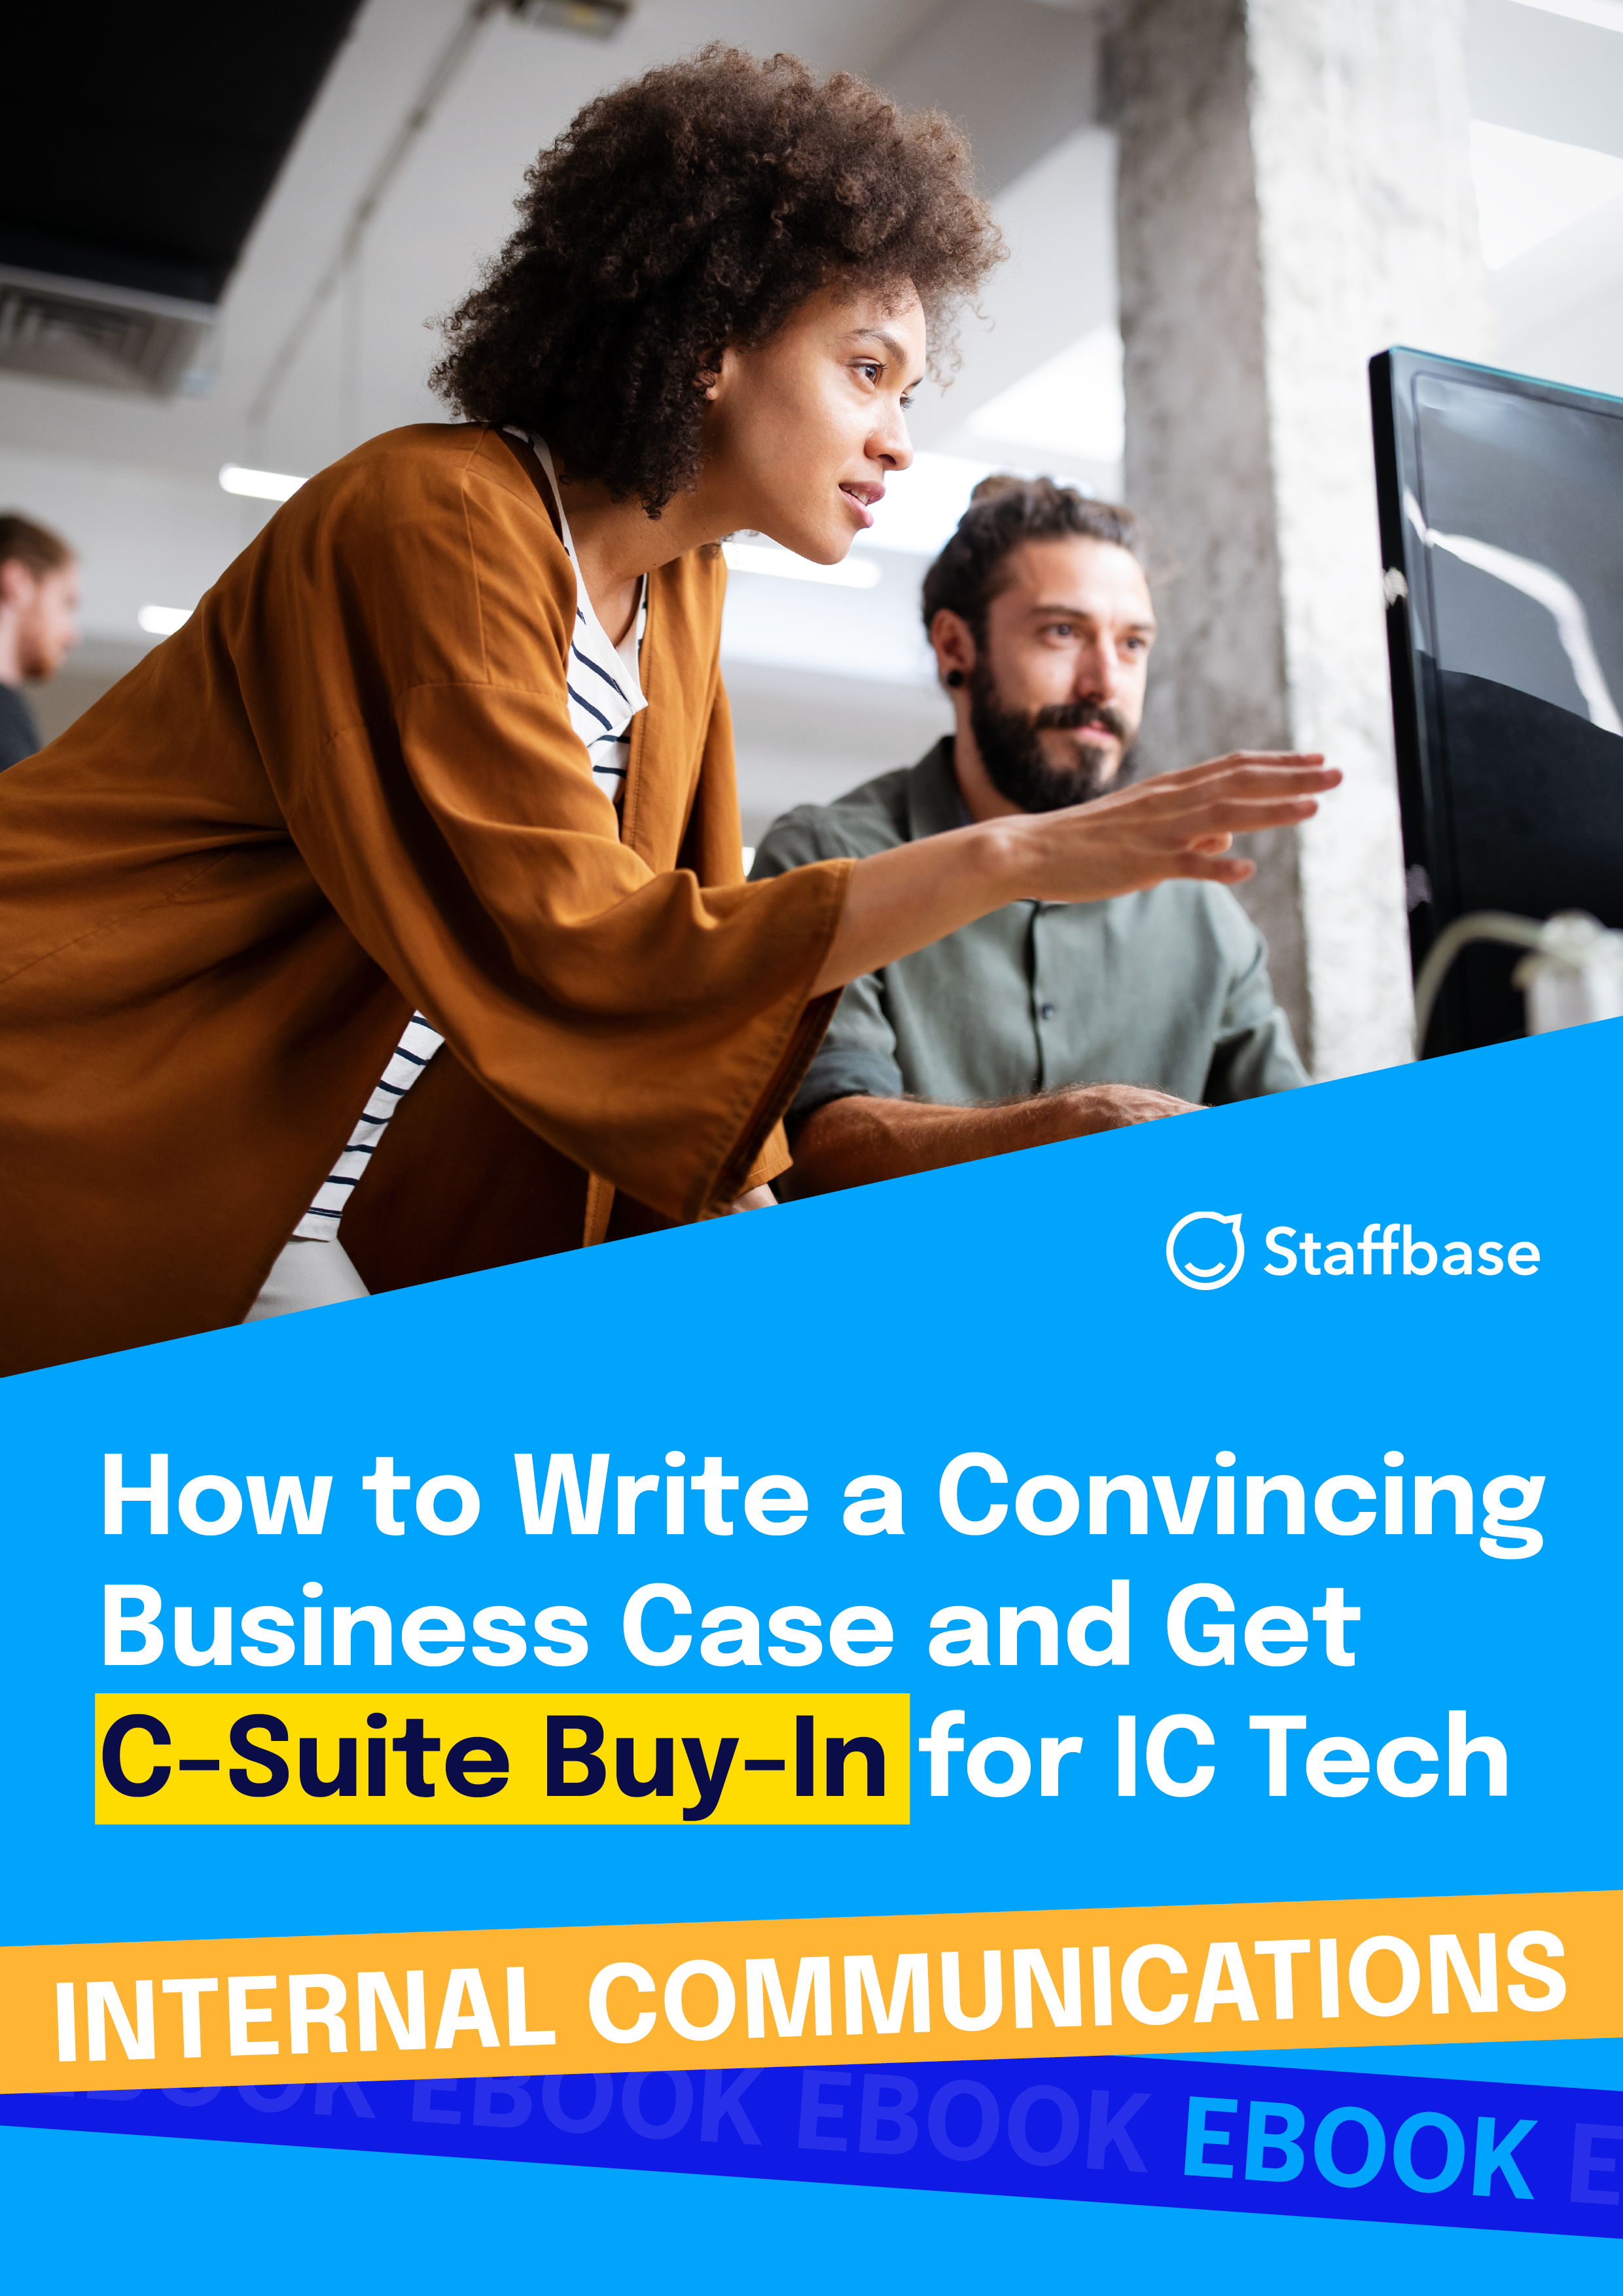 How to Write a Convincing Business Case and Get C-Suite Buy-In for IC Tech